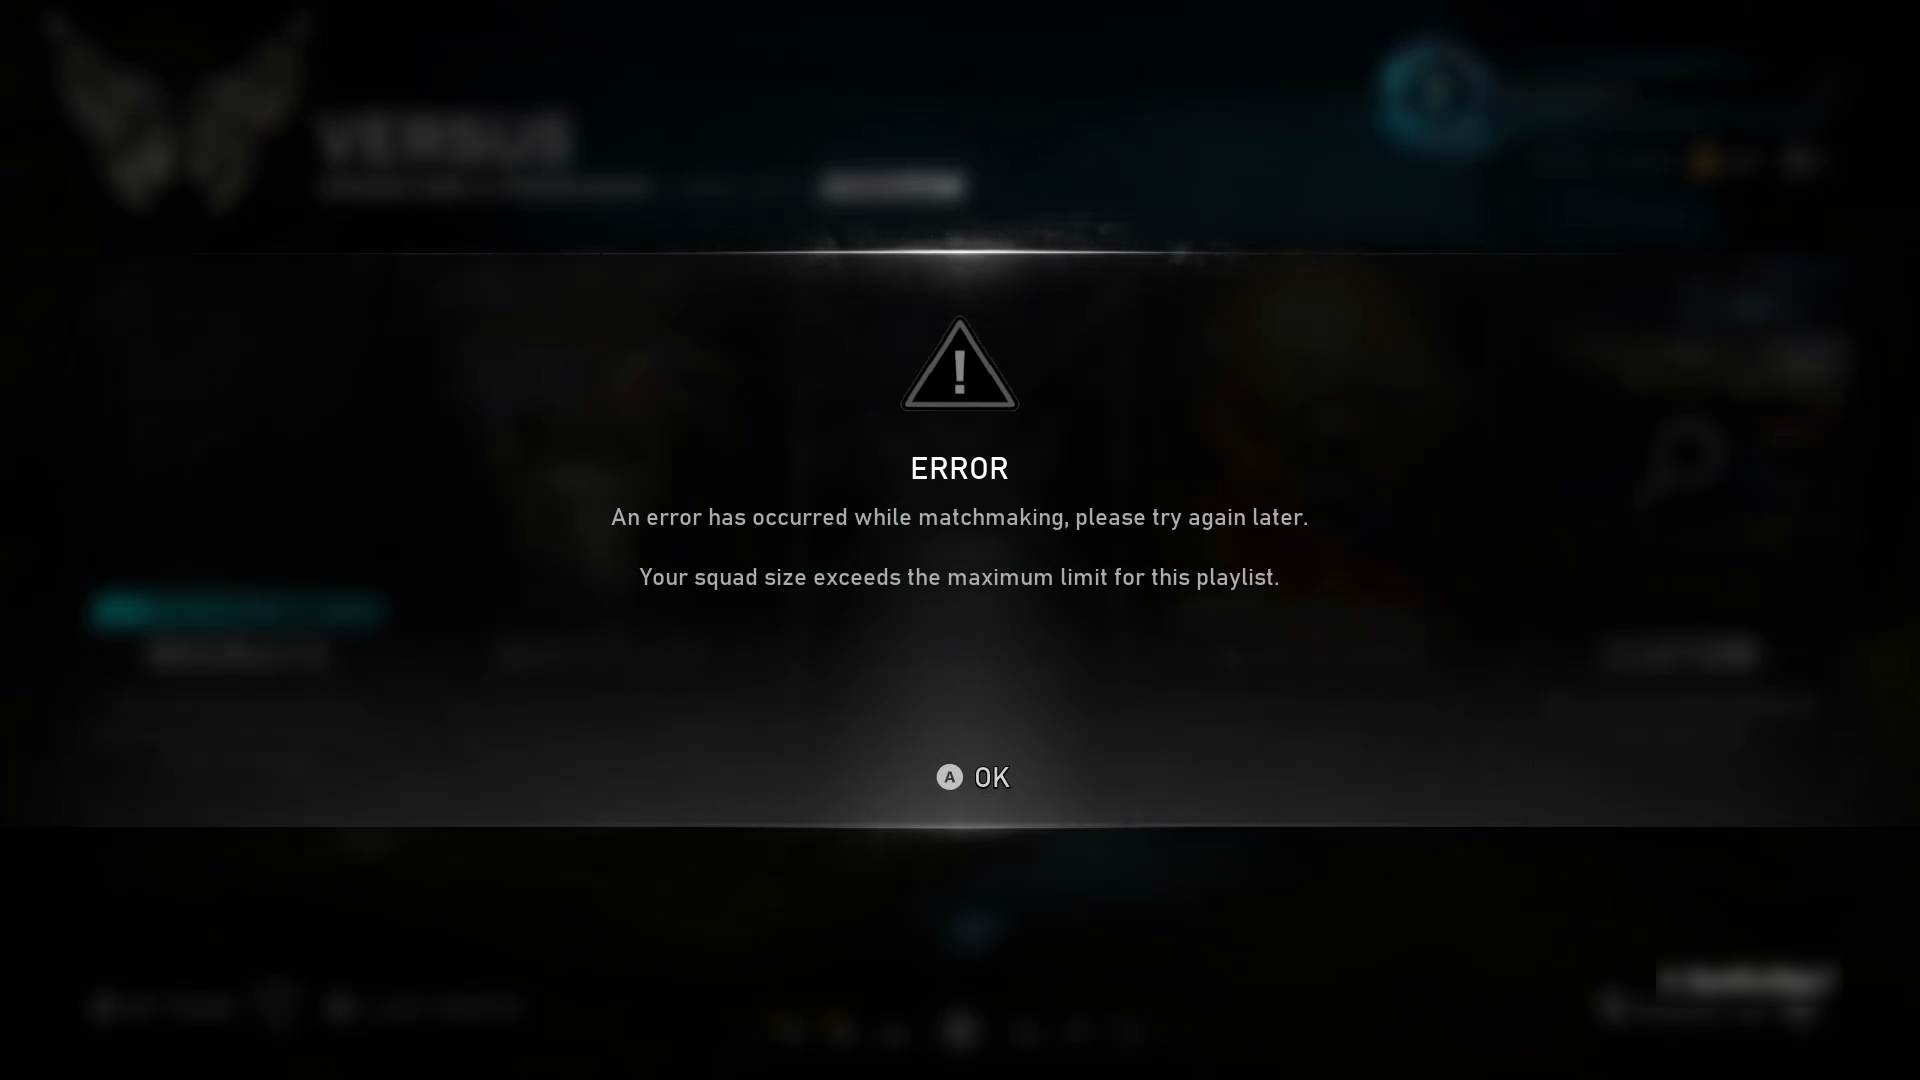 A screenshot from Gears 5, showing an error dialog with information that explains what might be causing the error.